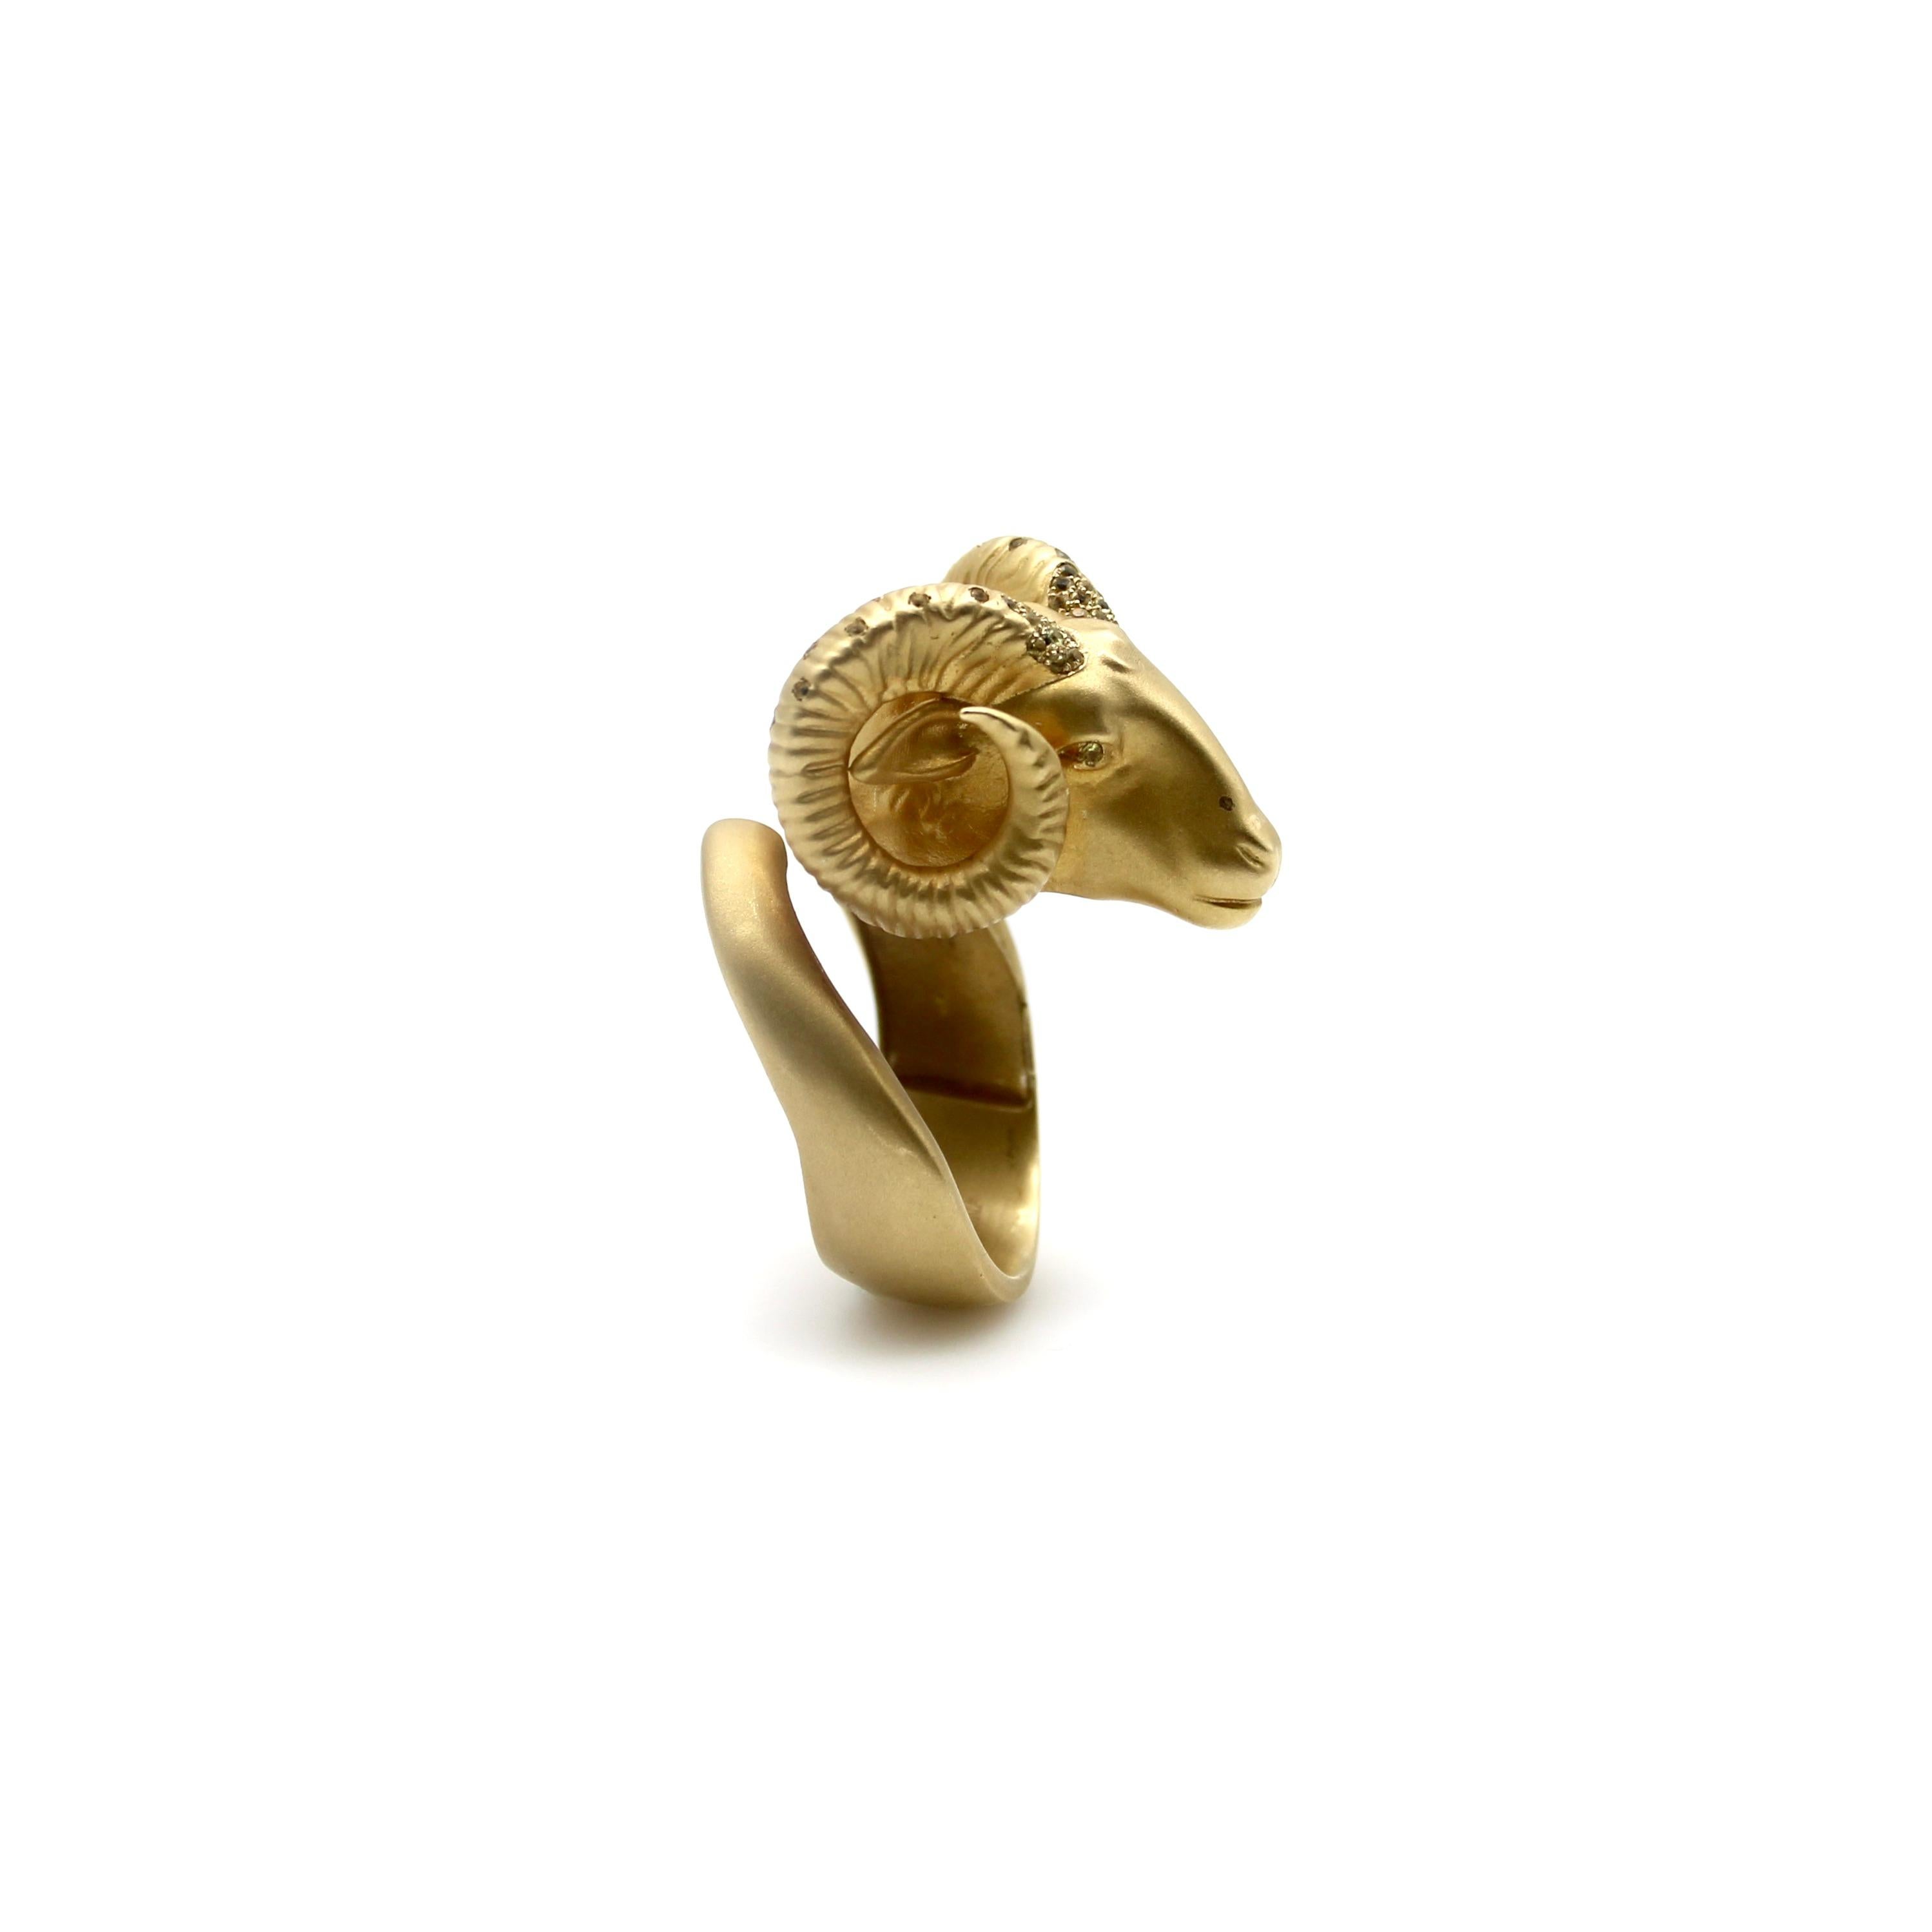 Helannona 14k Gold Ram’s Head Ring with Micro Pave Citrines 2